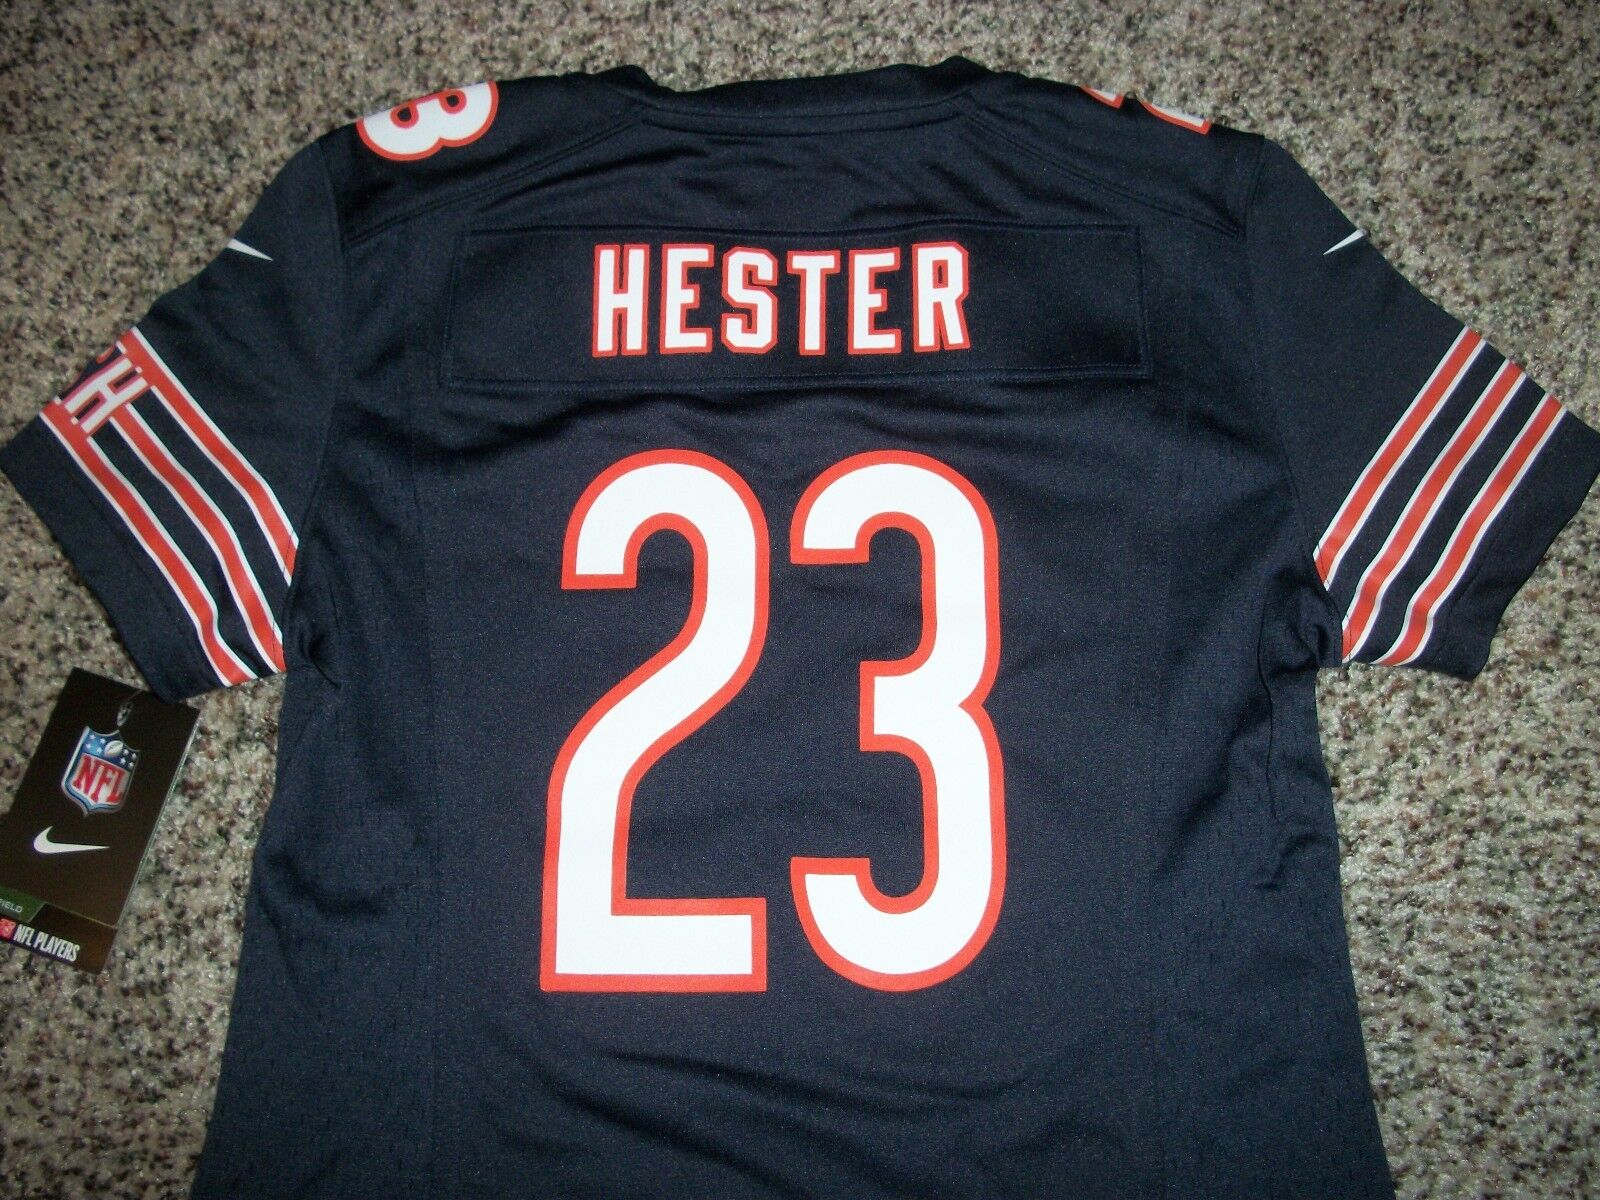 DEVIN HESTER New NWT Womens Jersey Nike Chicago Bears Small Medium ...